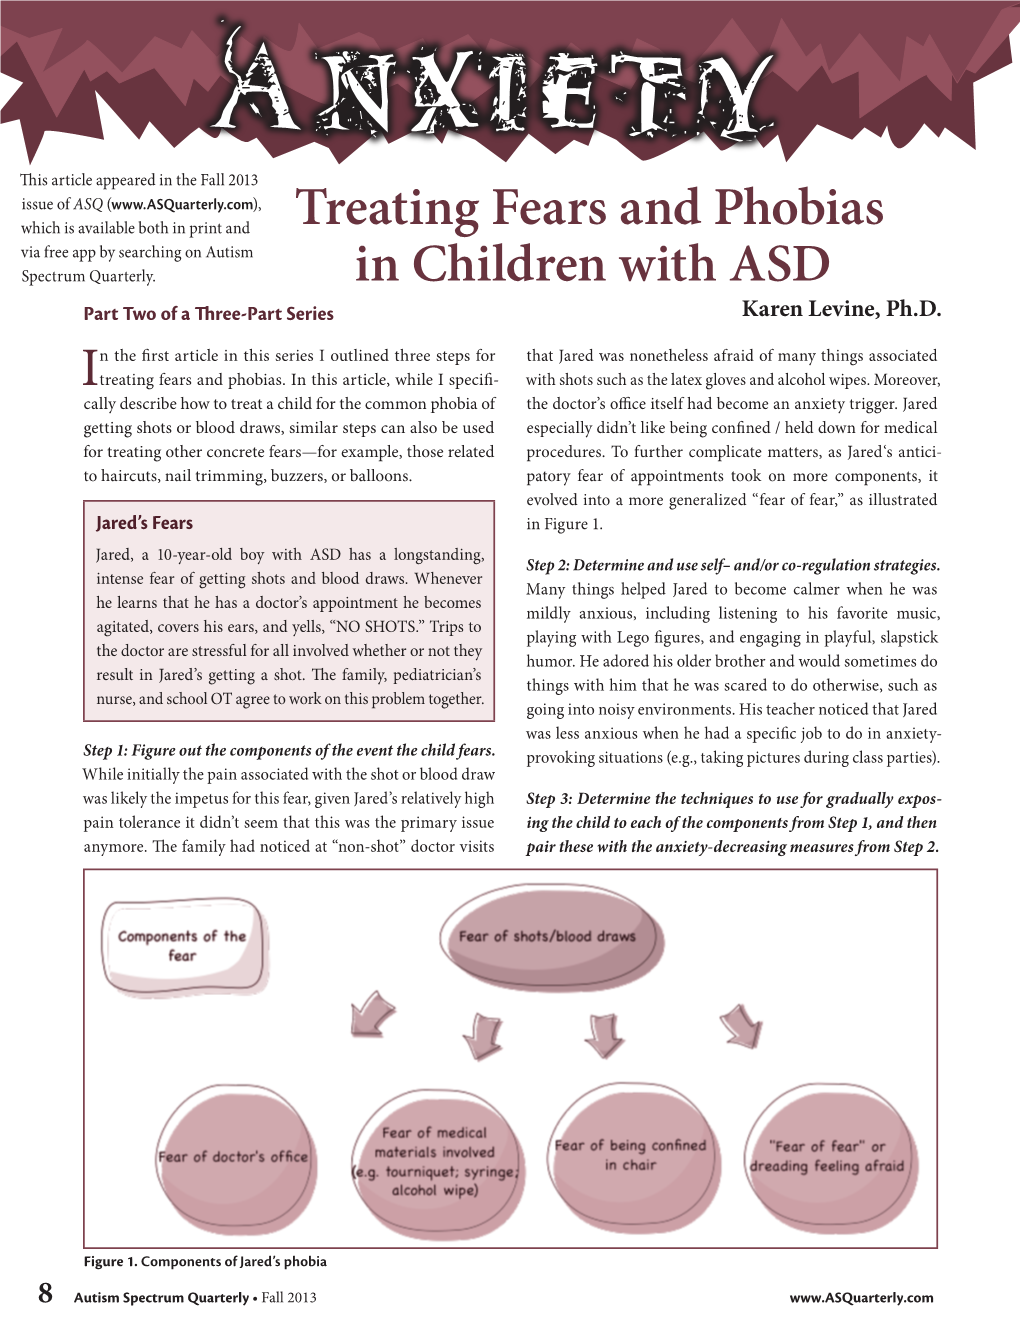 Treating Fears and Phobias in Children With